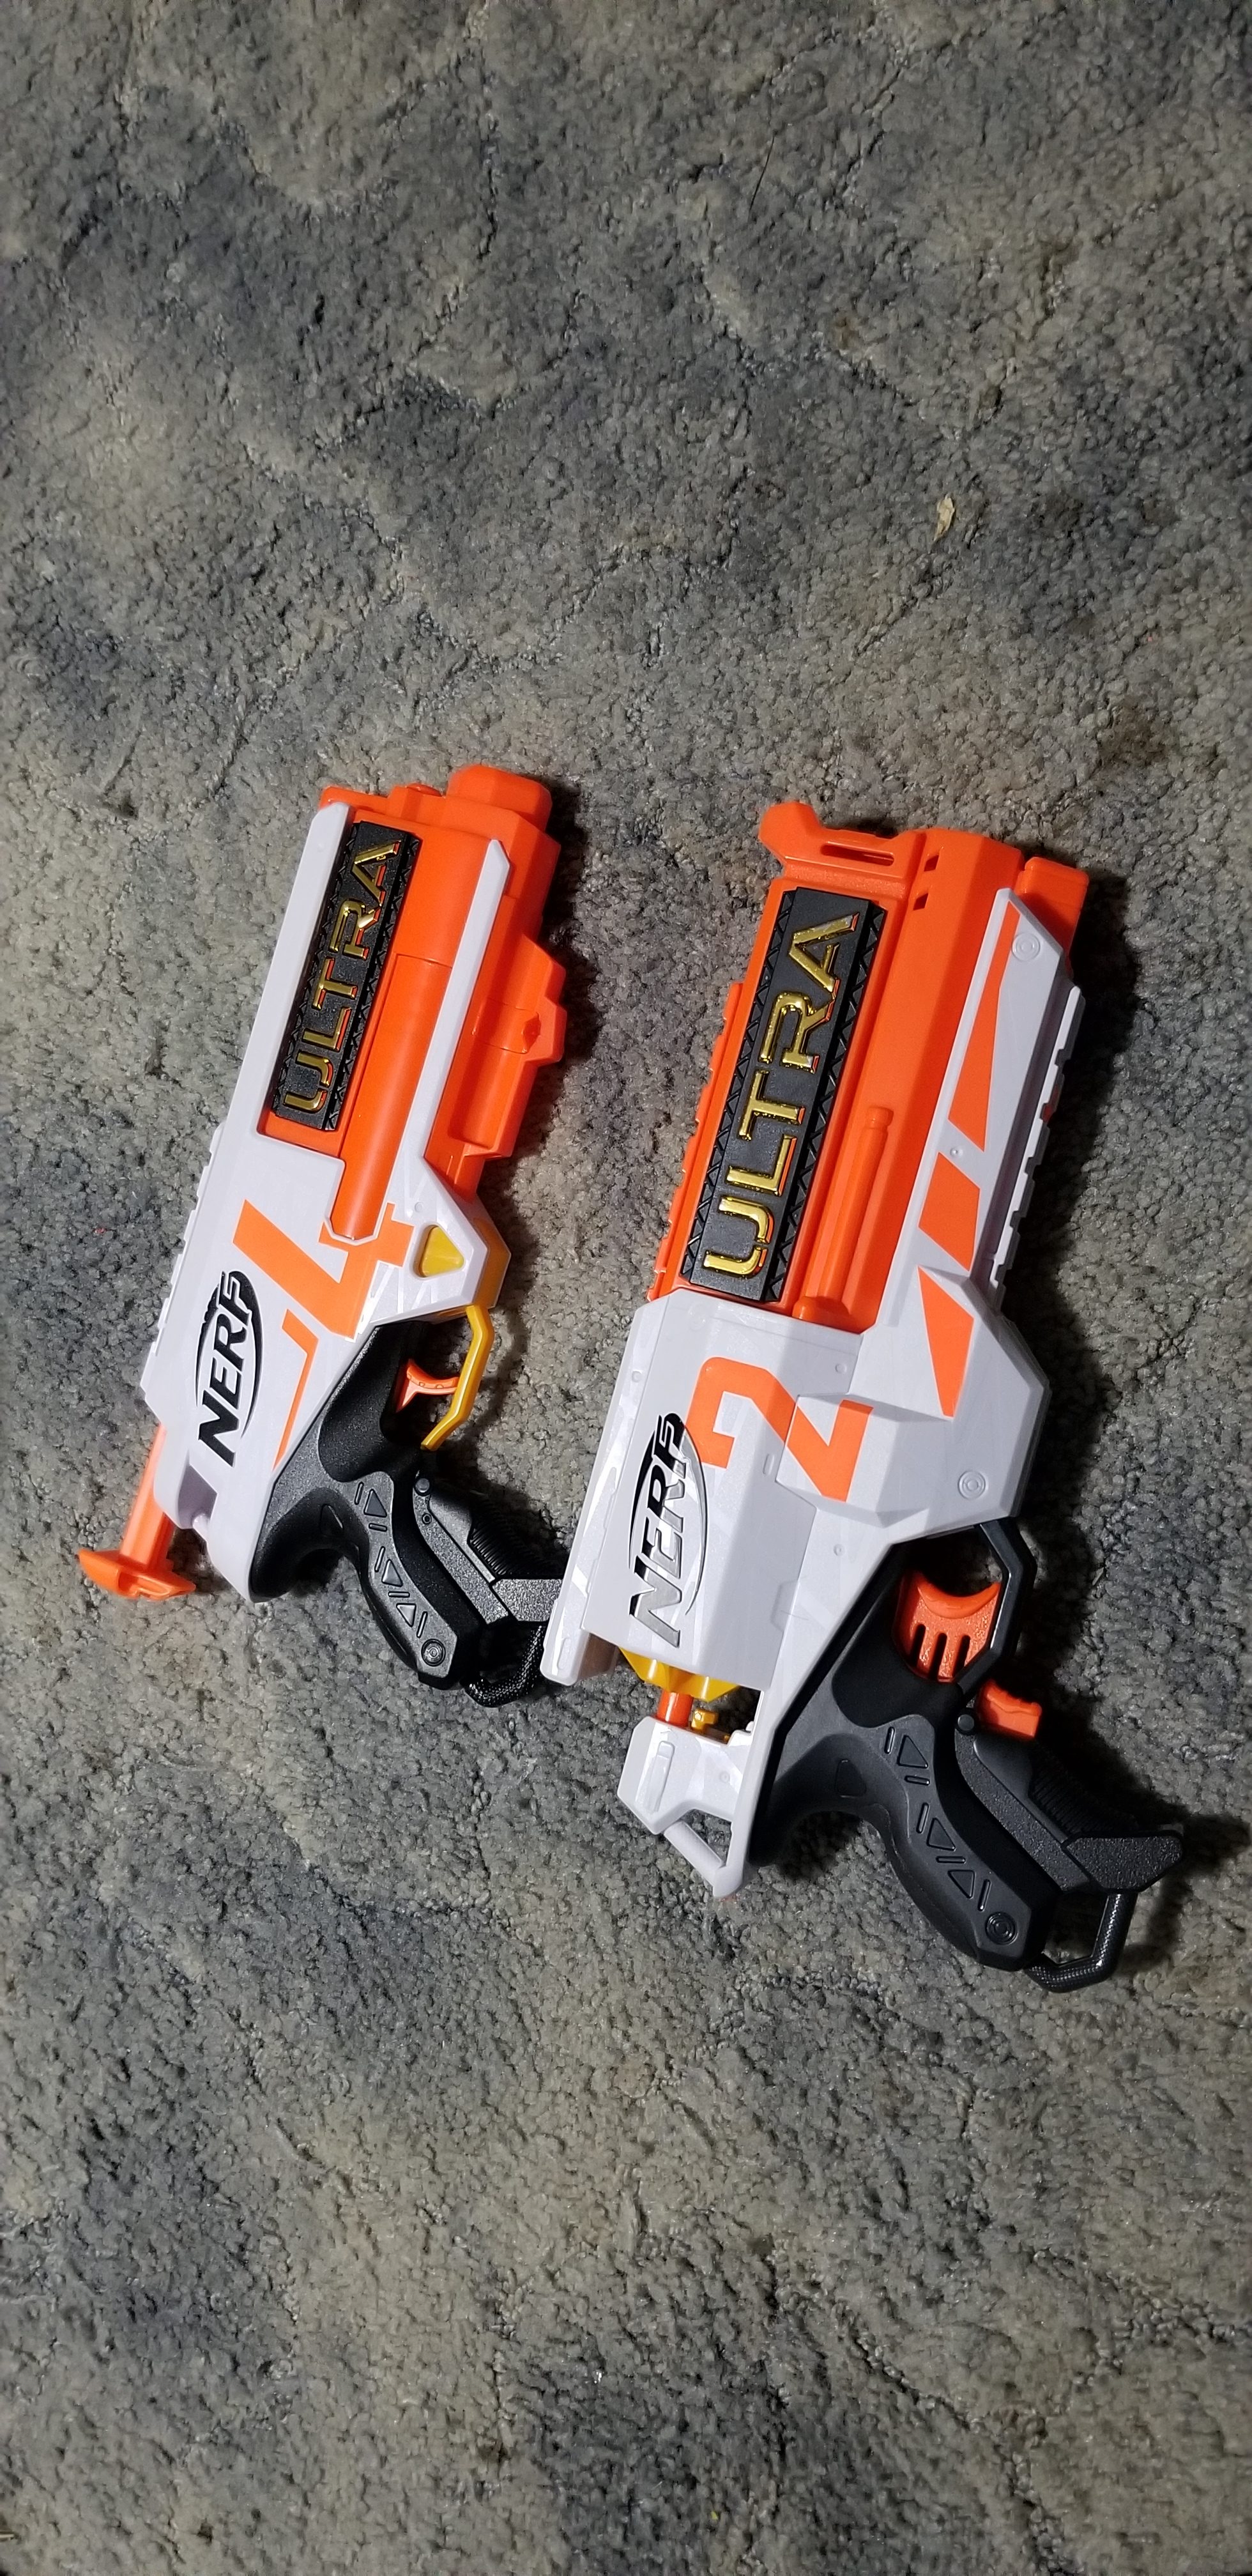 Nerf Ultra Four Review | Hub